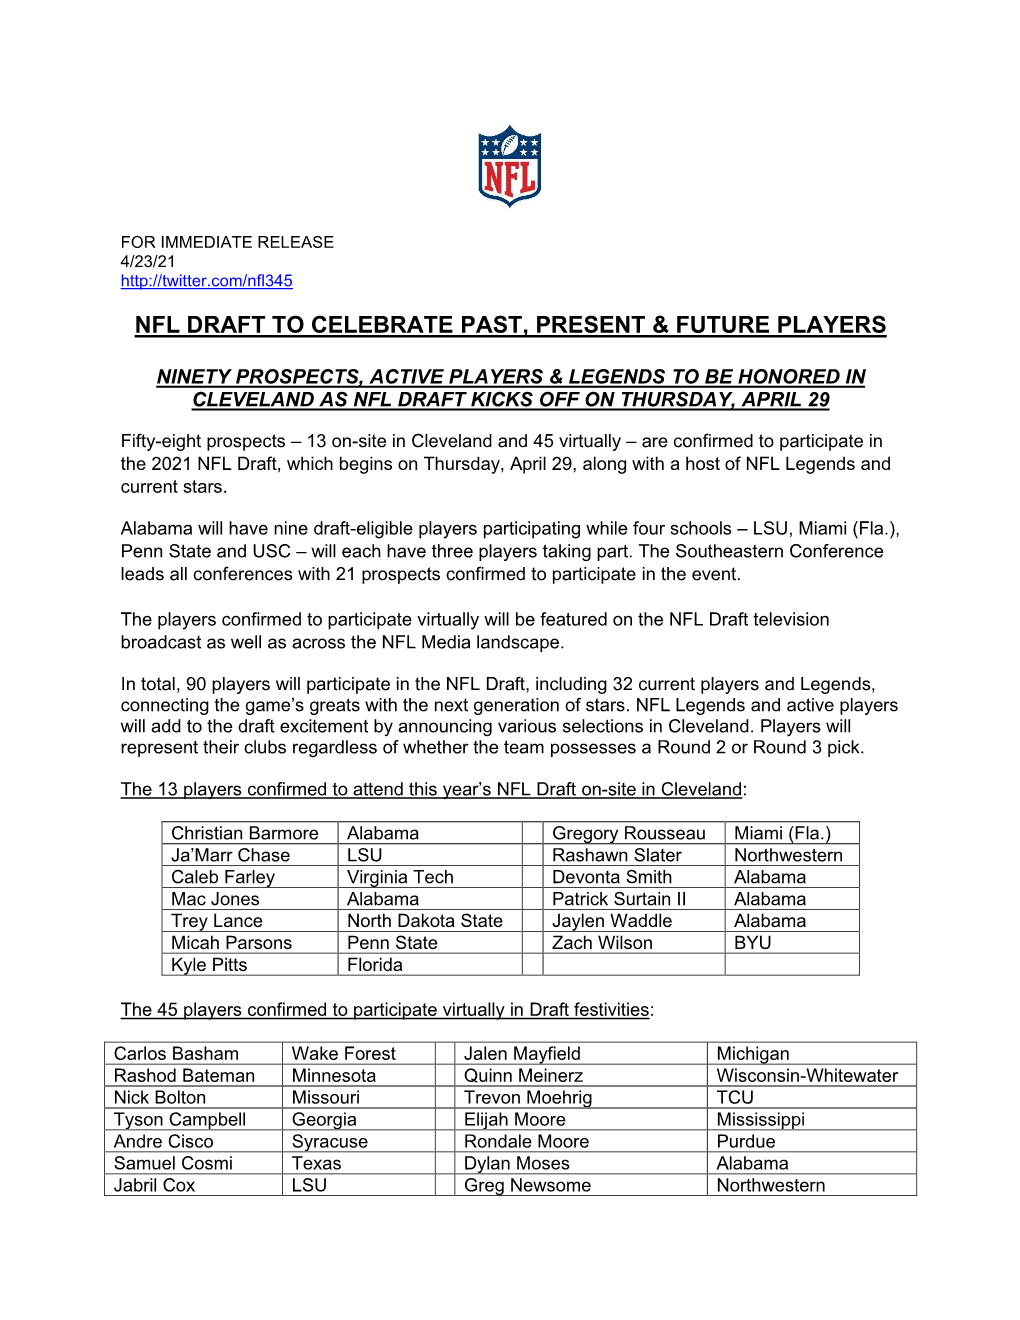 Nfl Draft to Celebrate Past, Present & Future Players